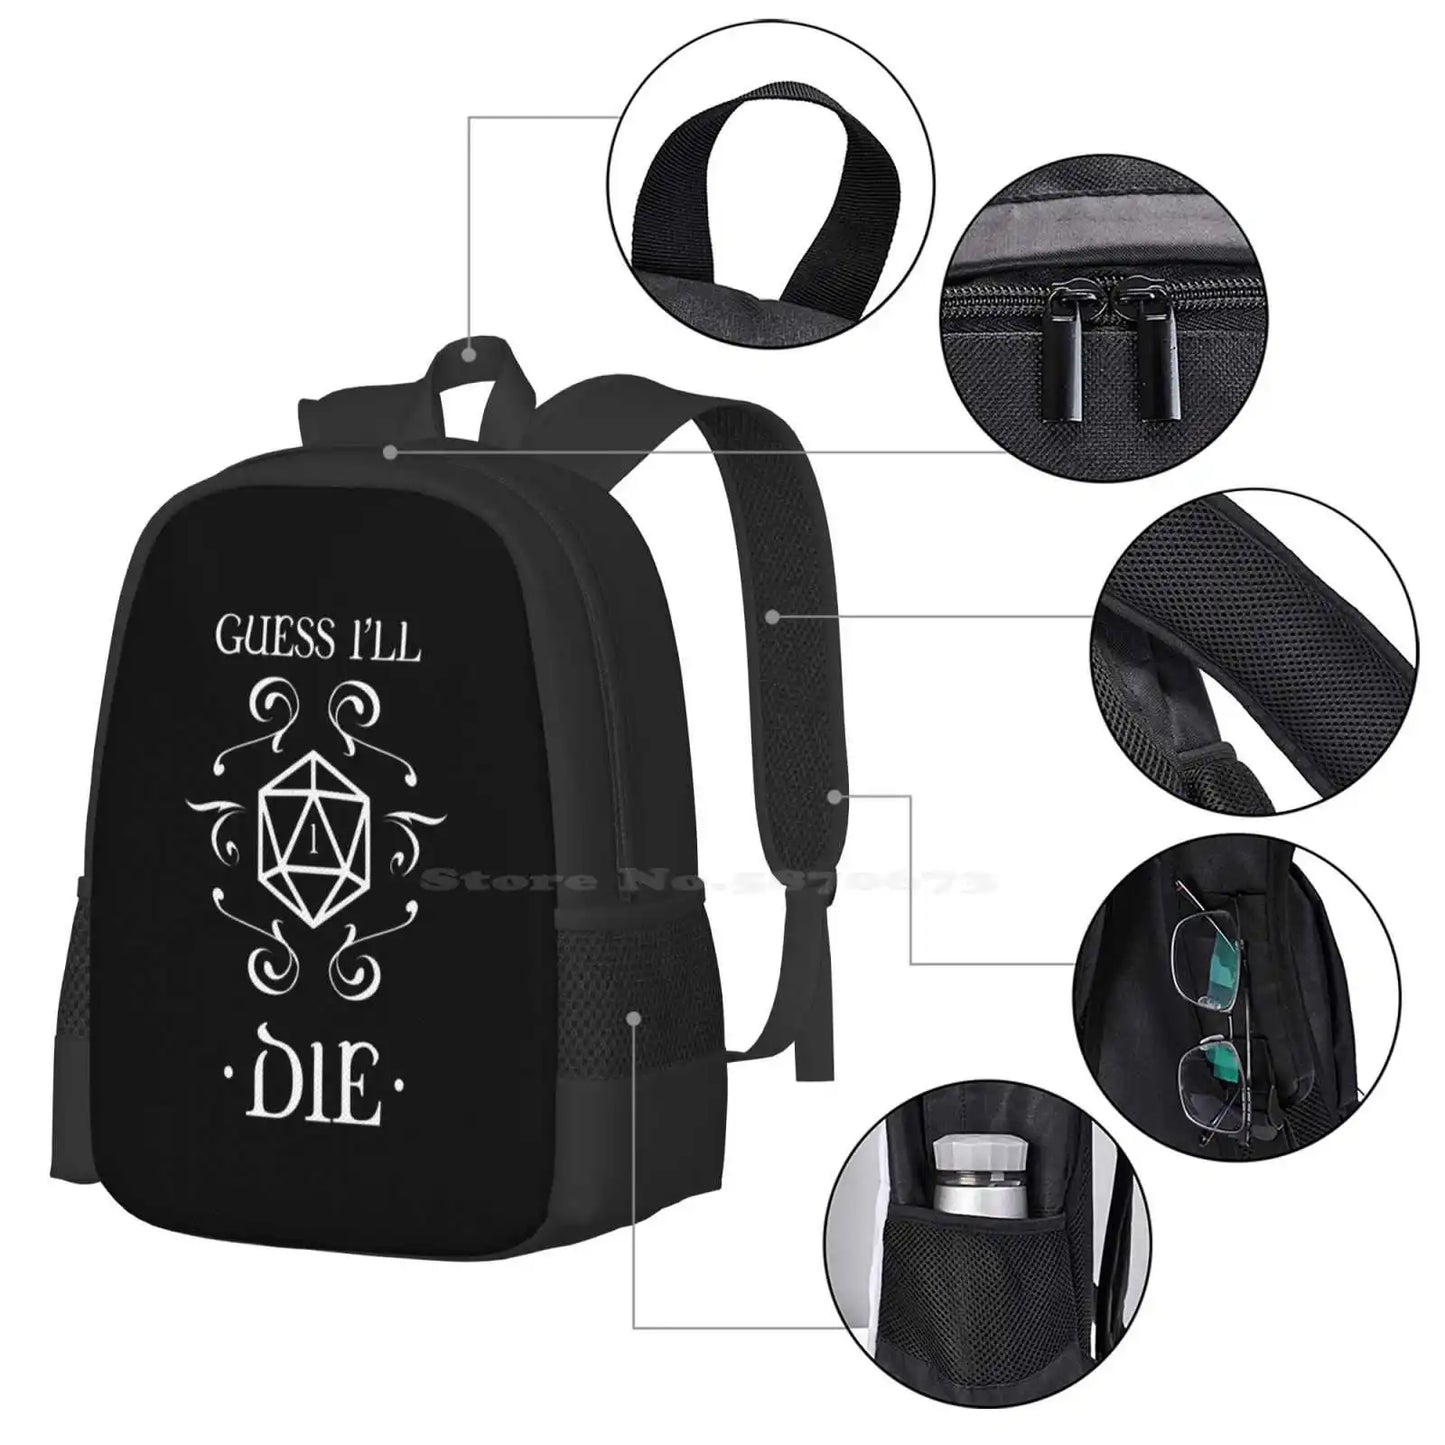 Ll Die D20 Dice Tabletop Rpg Addict Bag Backpack For Men Women Girls Teenage And Dragons Dnd D And D Dragons Pathfinder